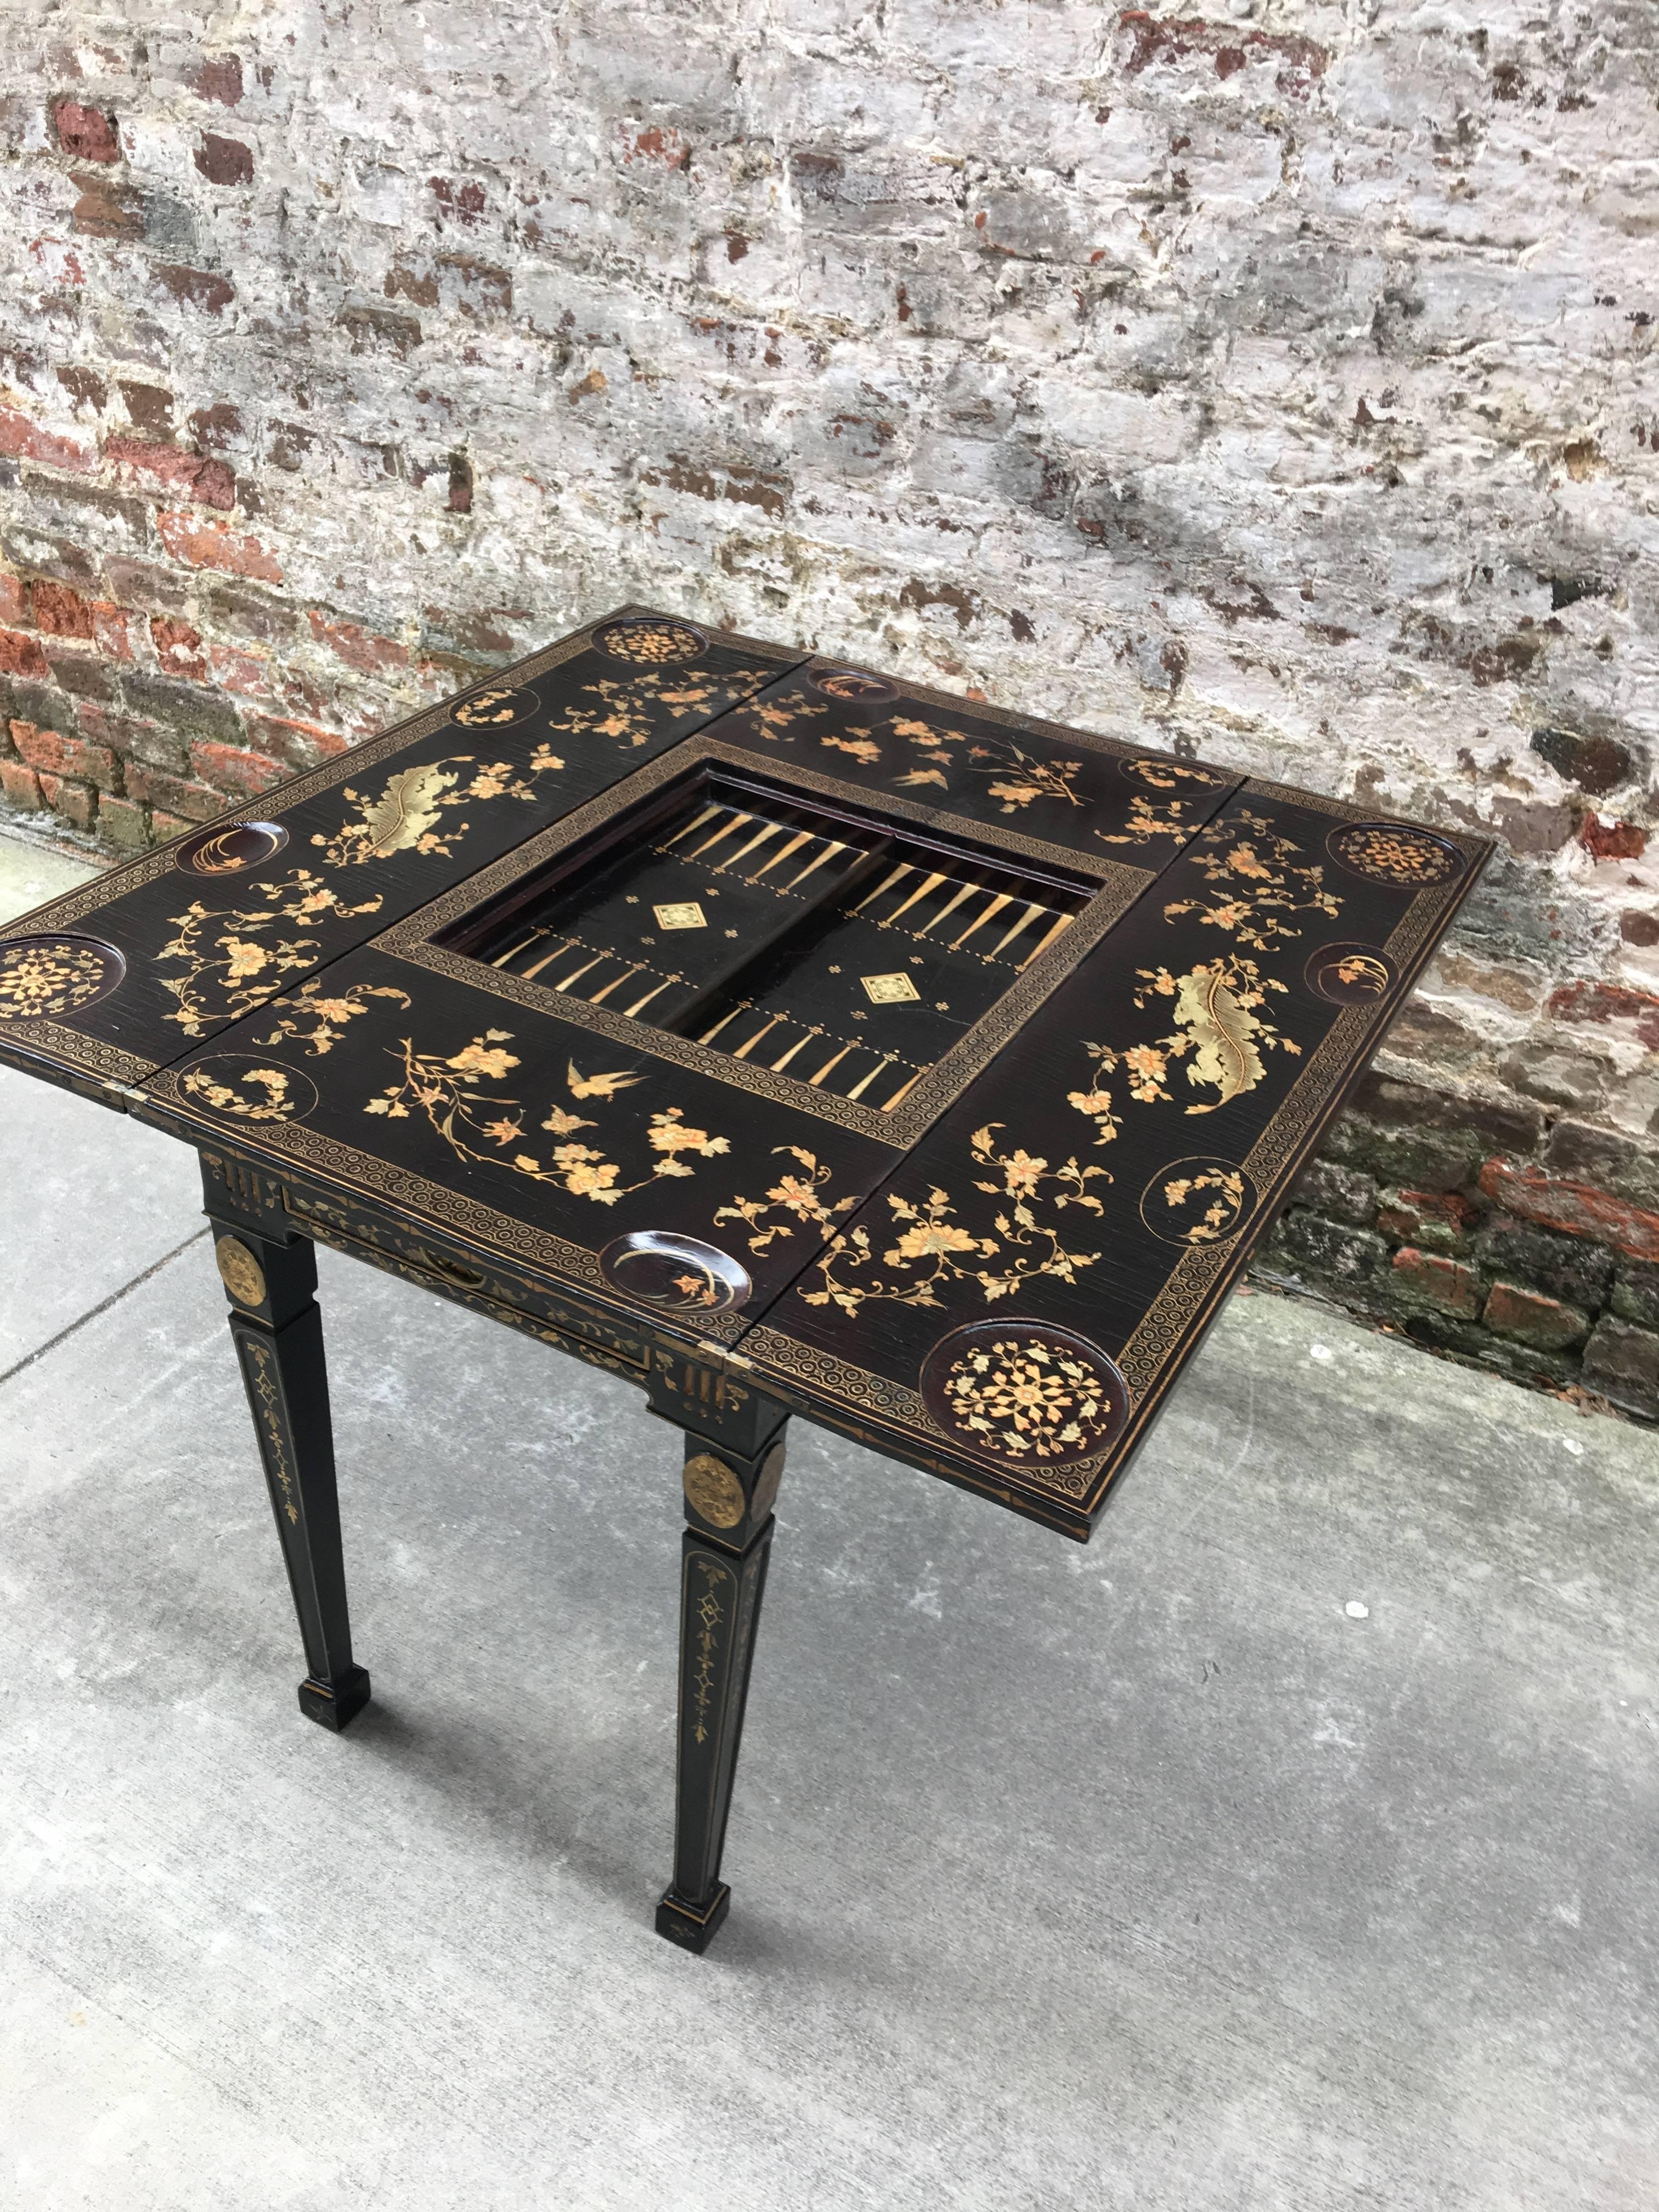 19th Century Chinese Export Chinoiserie Games Table early 19th century